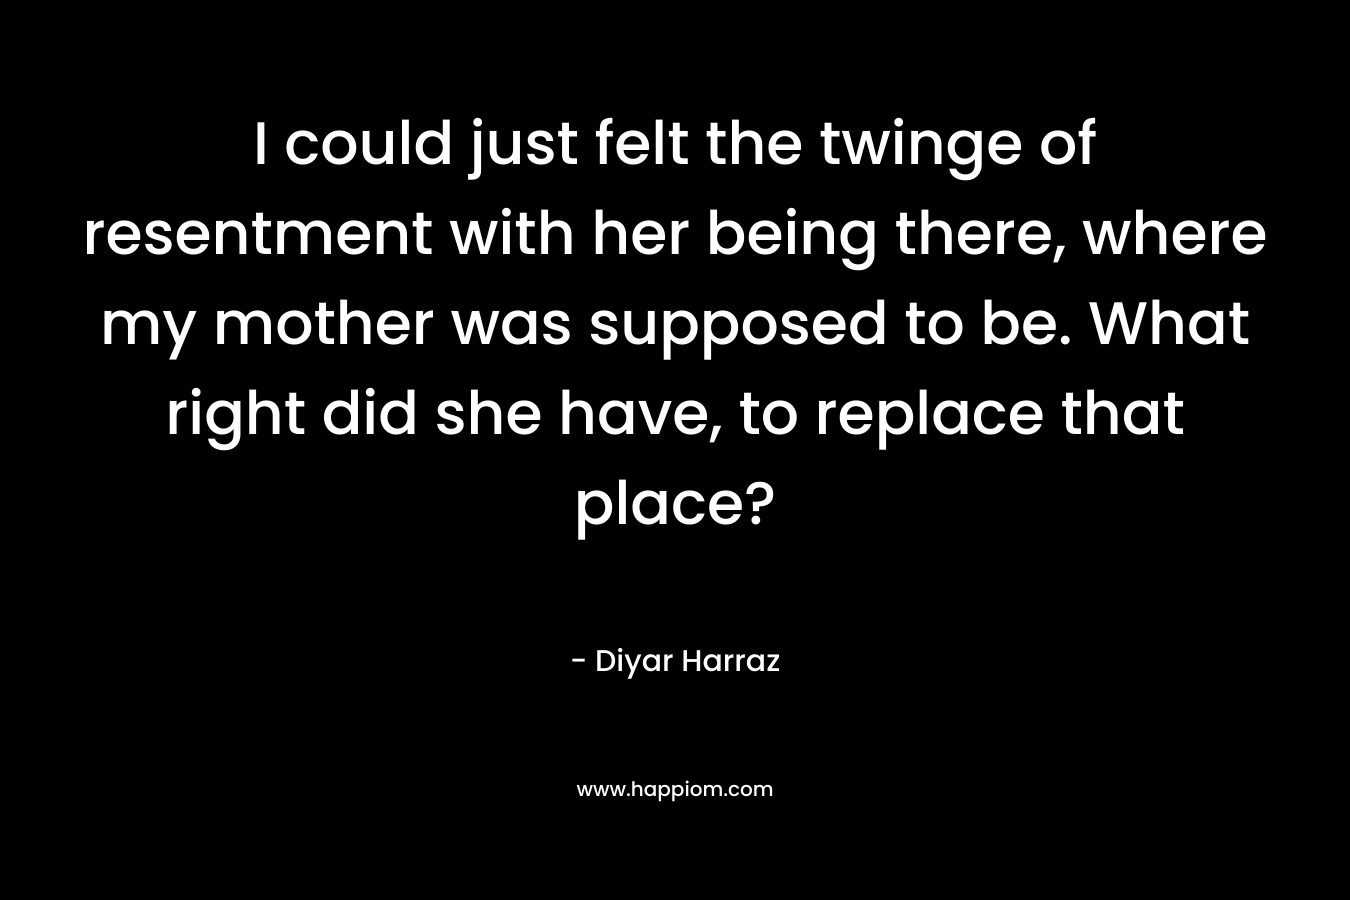 I could just felt the twinge of resentment with her being there, where my mother was supposed to be. What right did she have, to replace that place? – Diyar Harraz